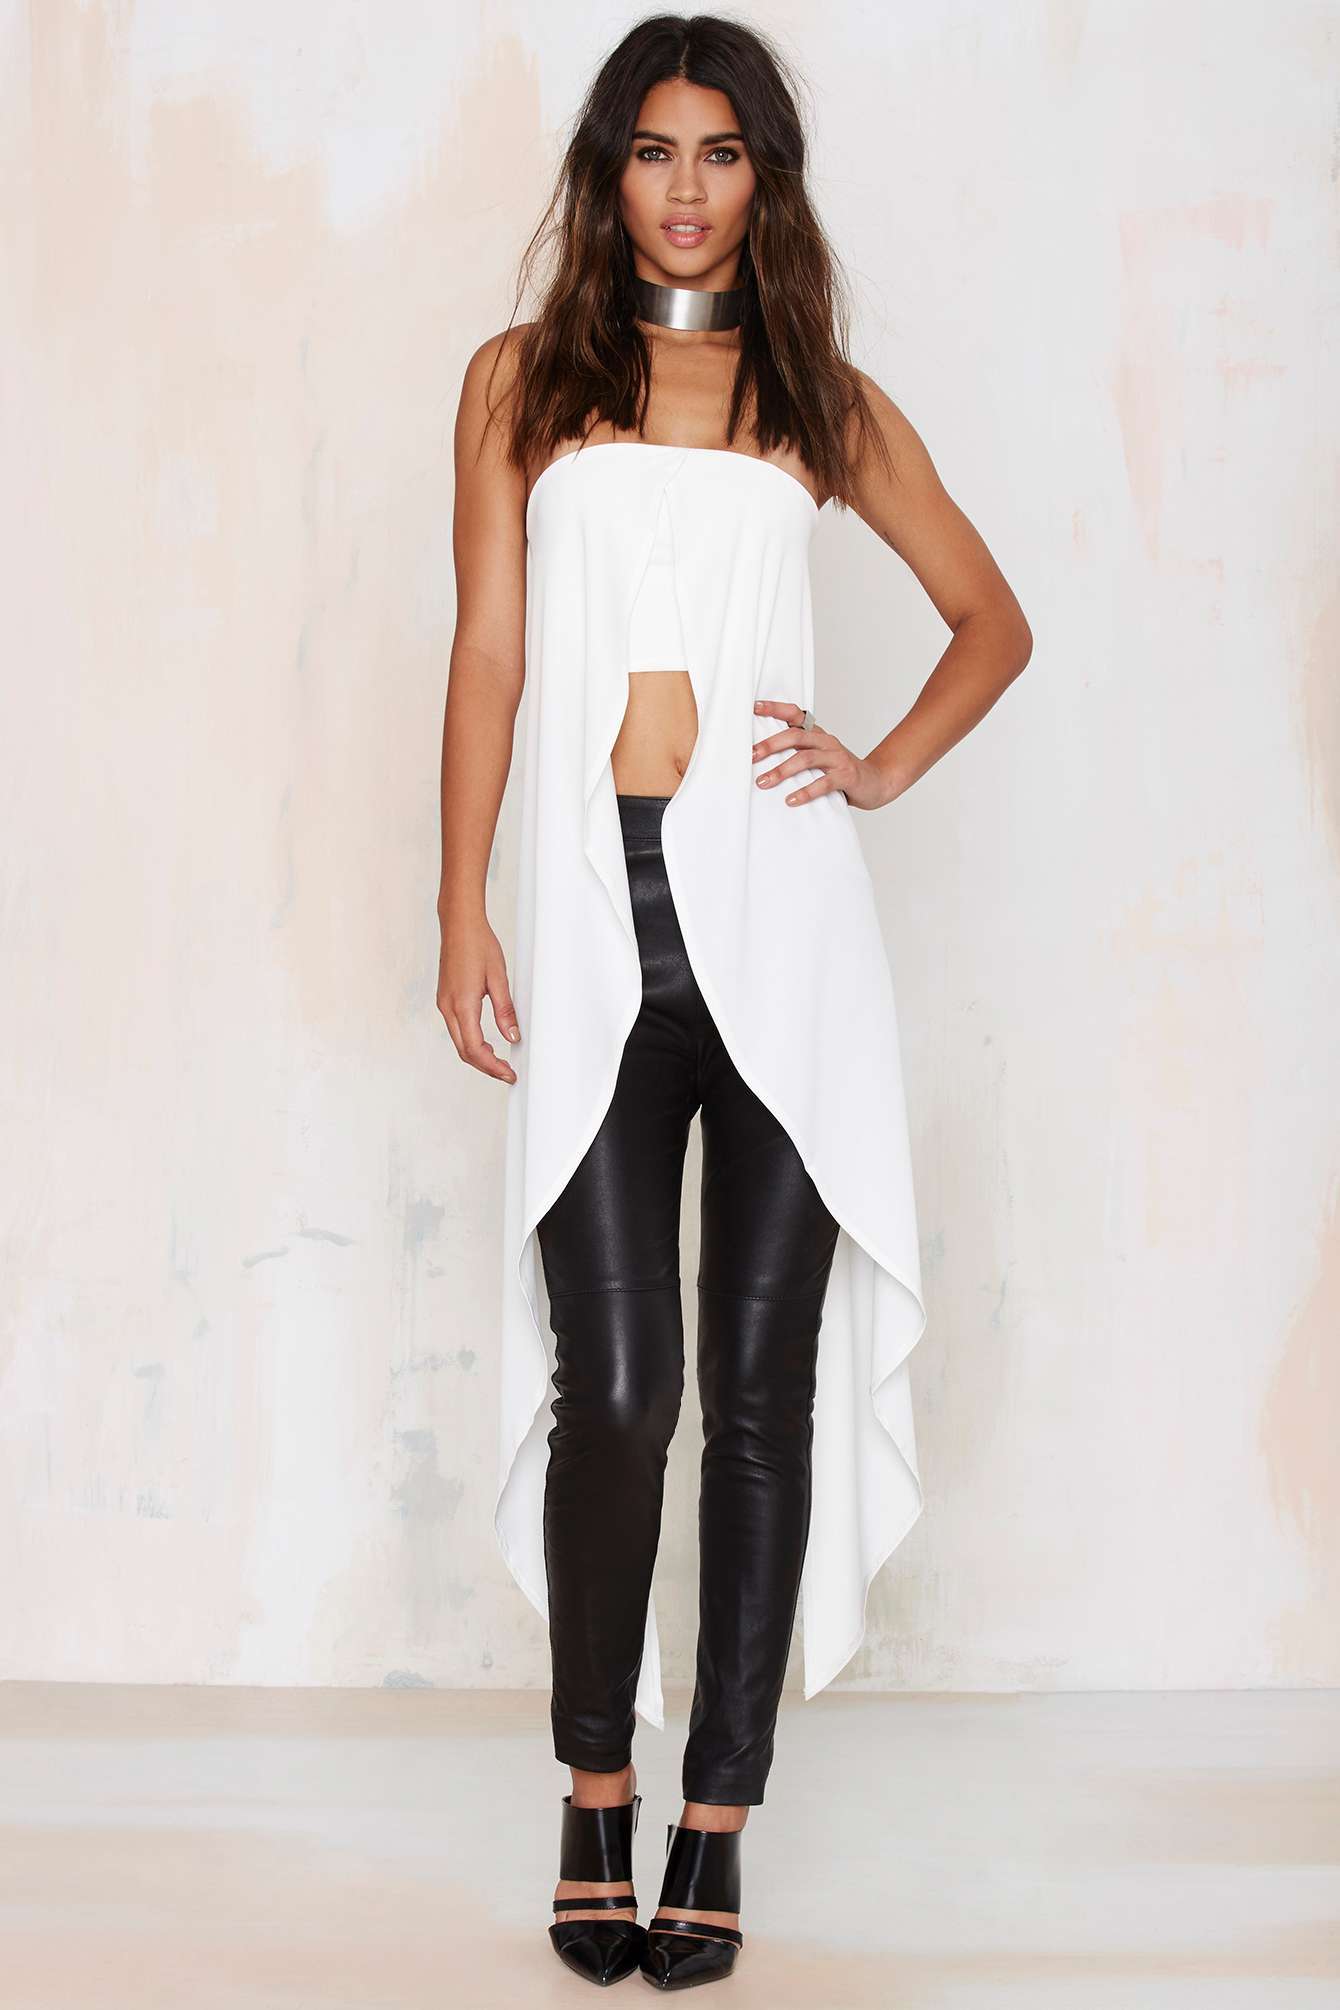 Bomb Product of the Day: Lavish Alice’s Great Lengths White Bandeau Top